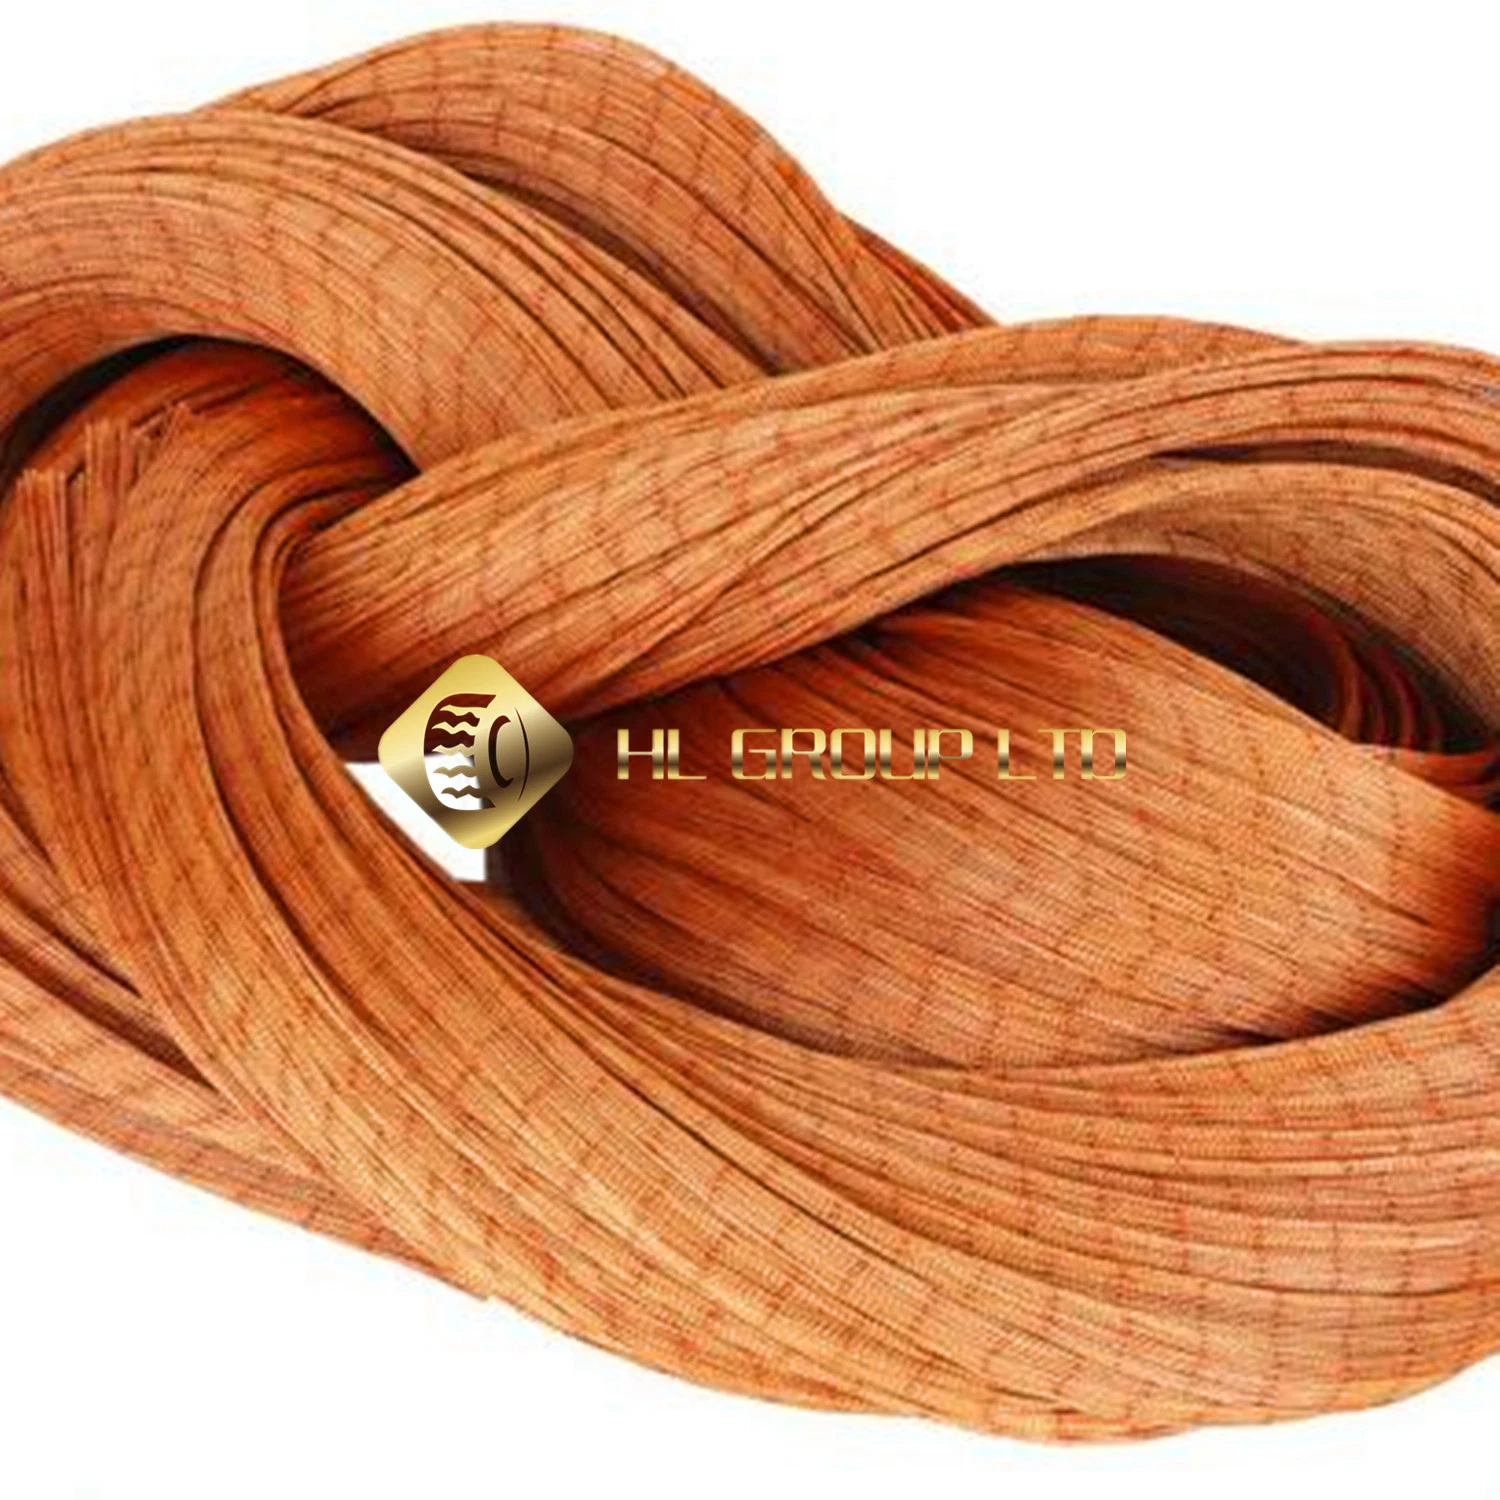 Tire Cord Fabrics of High Tenacity Yarn of Polyester Dipped, Secondary Quality for Making Fishing Net Packed in Rolls